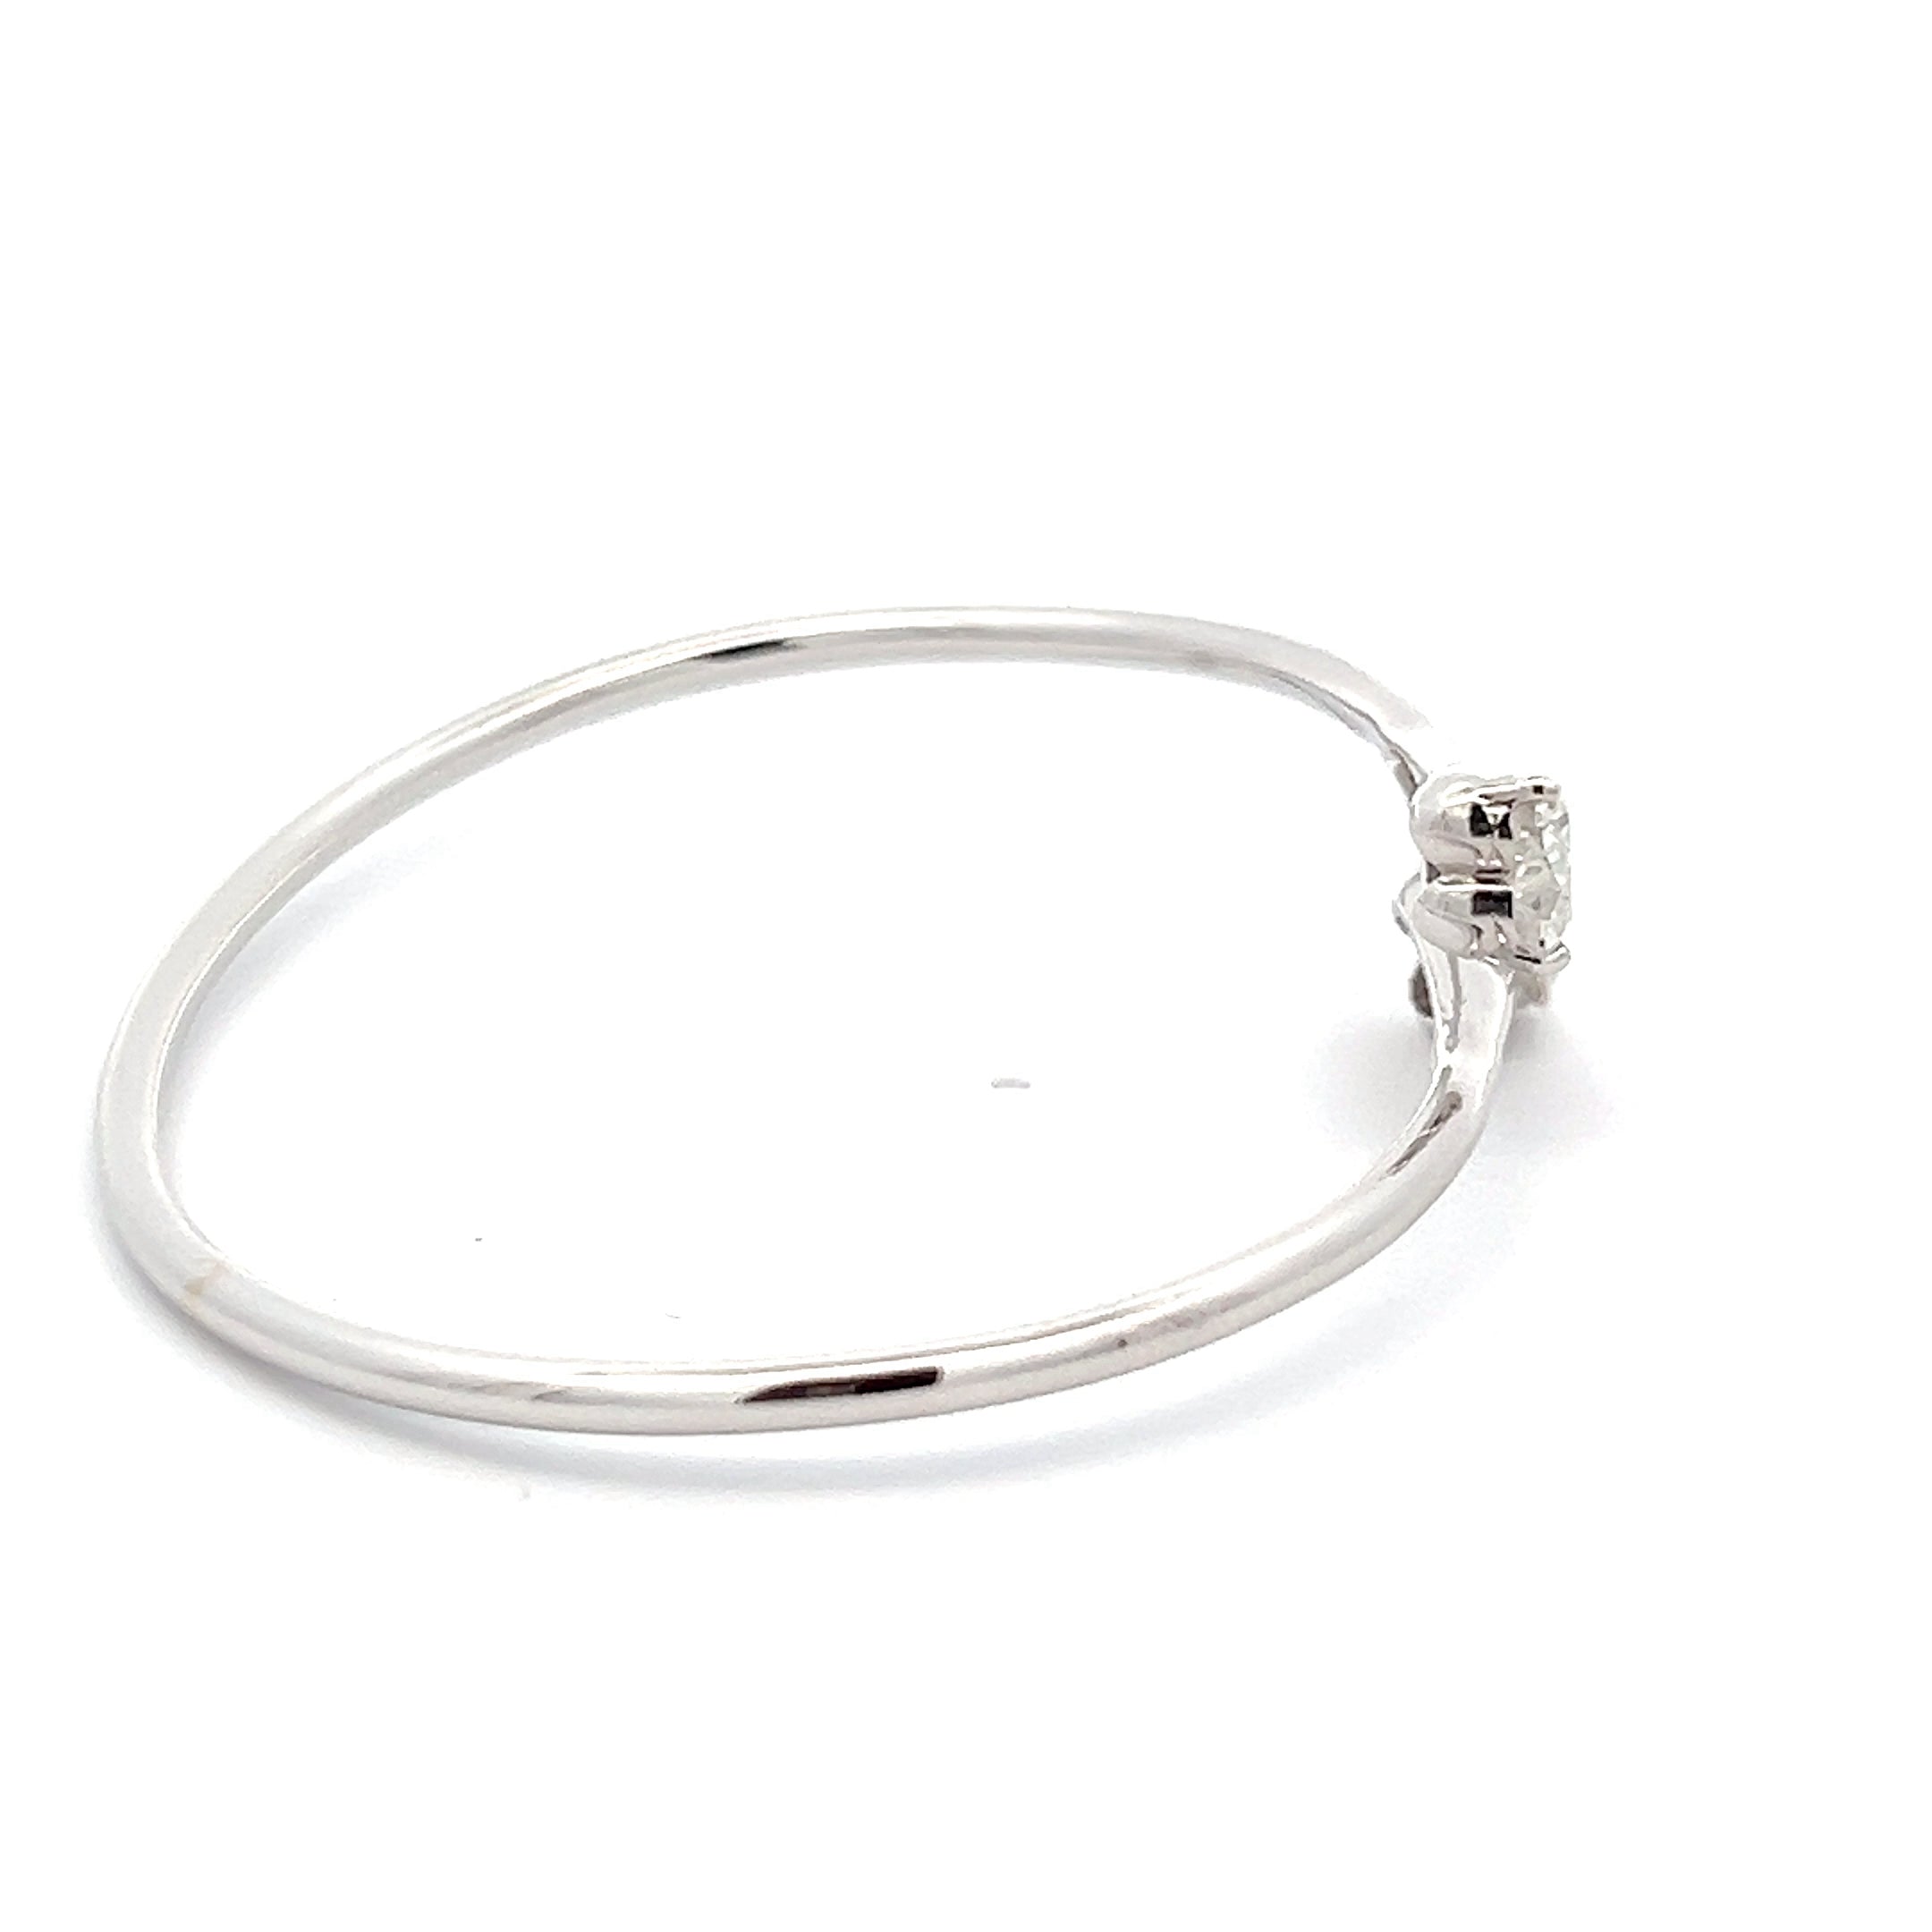 Dainty Charming Bracelet is 2.00c in Heart Shape Solitaire 14k White Gold With Lab Grown Moissanite